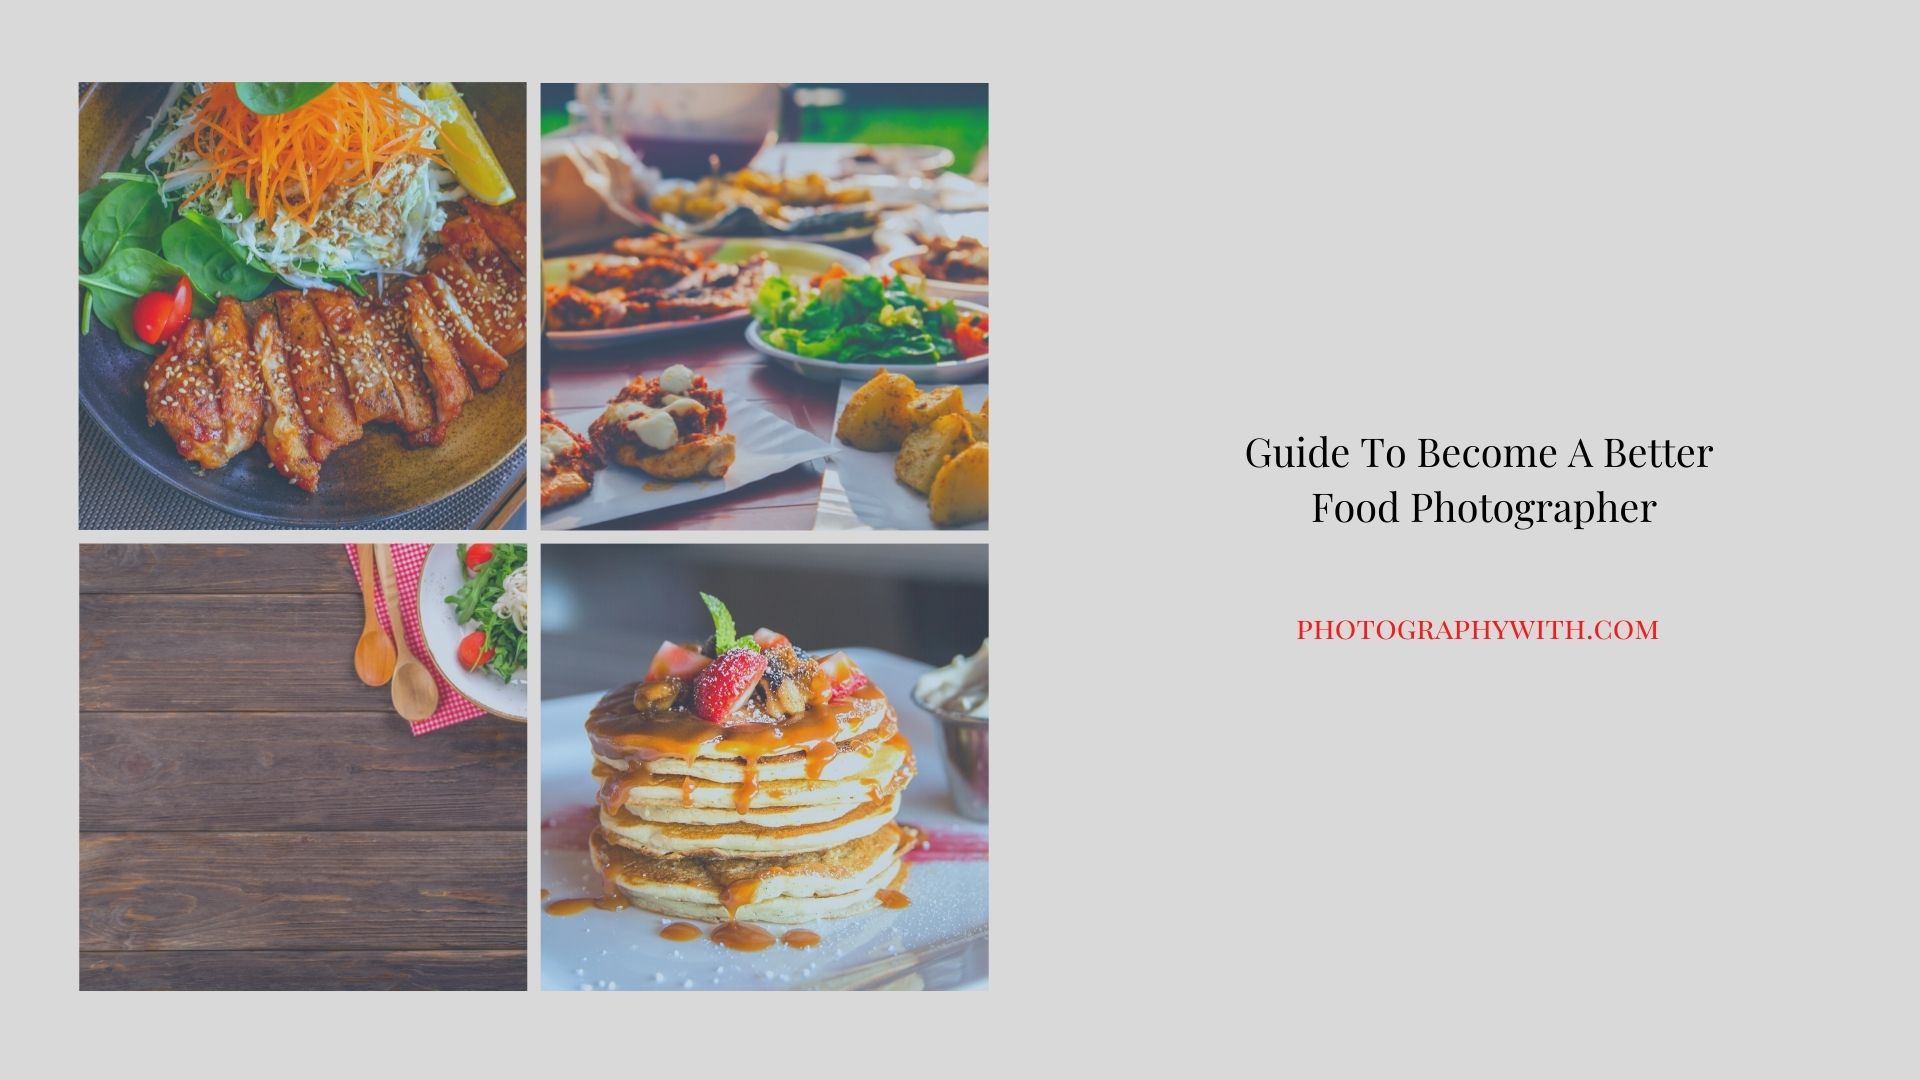 Guide To Become A Better Food Photographer